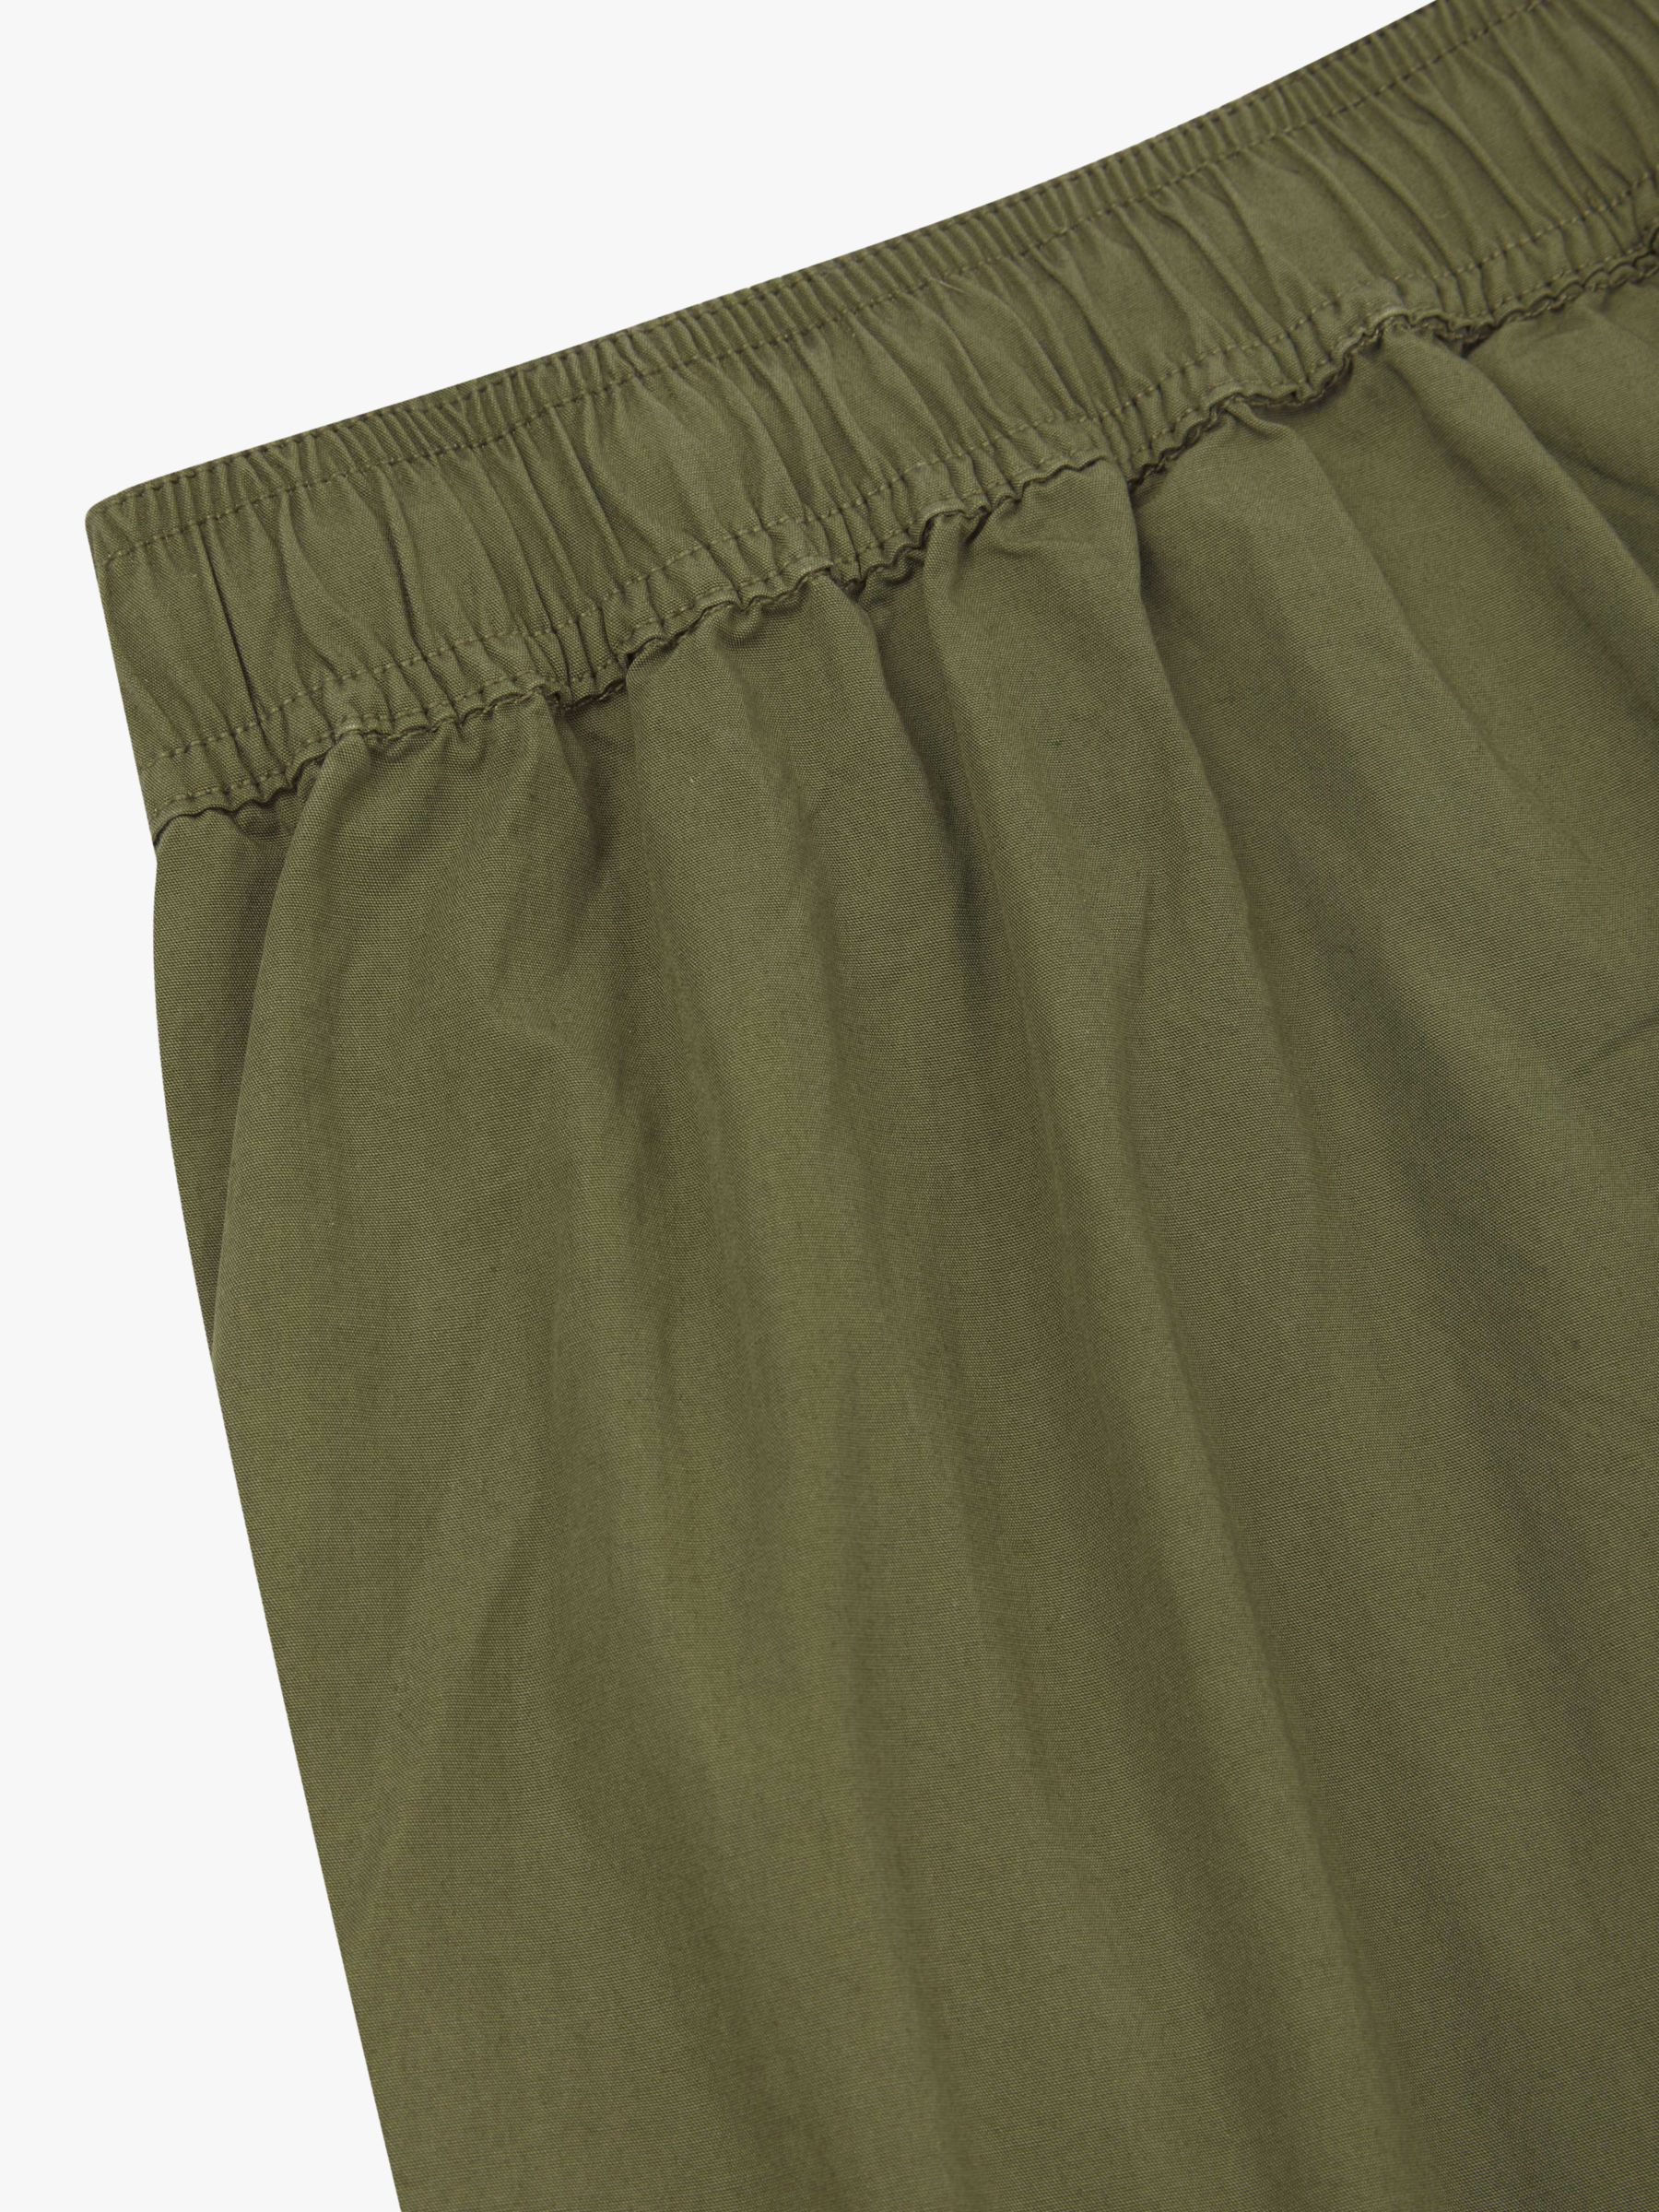 Buy Uskees Lightweight Trousers, Olive Online at johnlewis.com